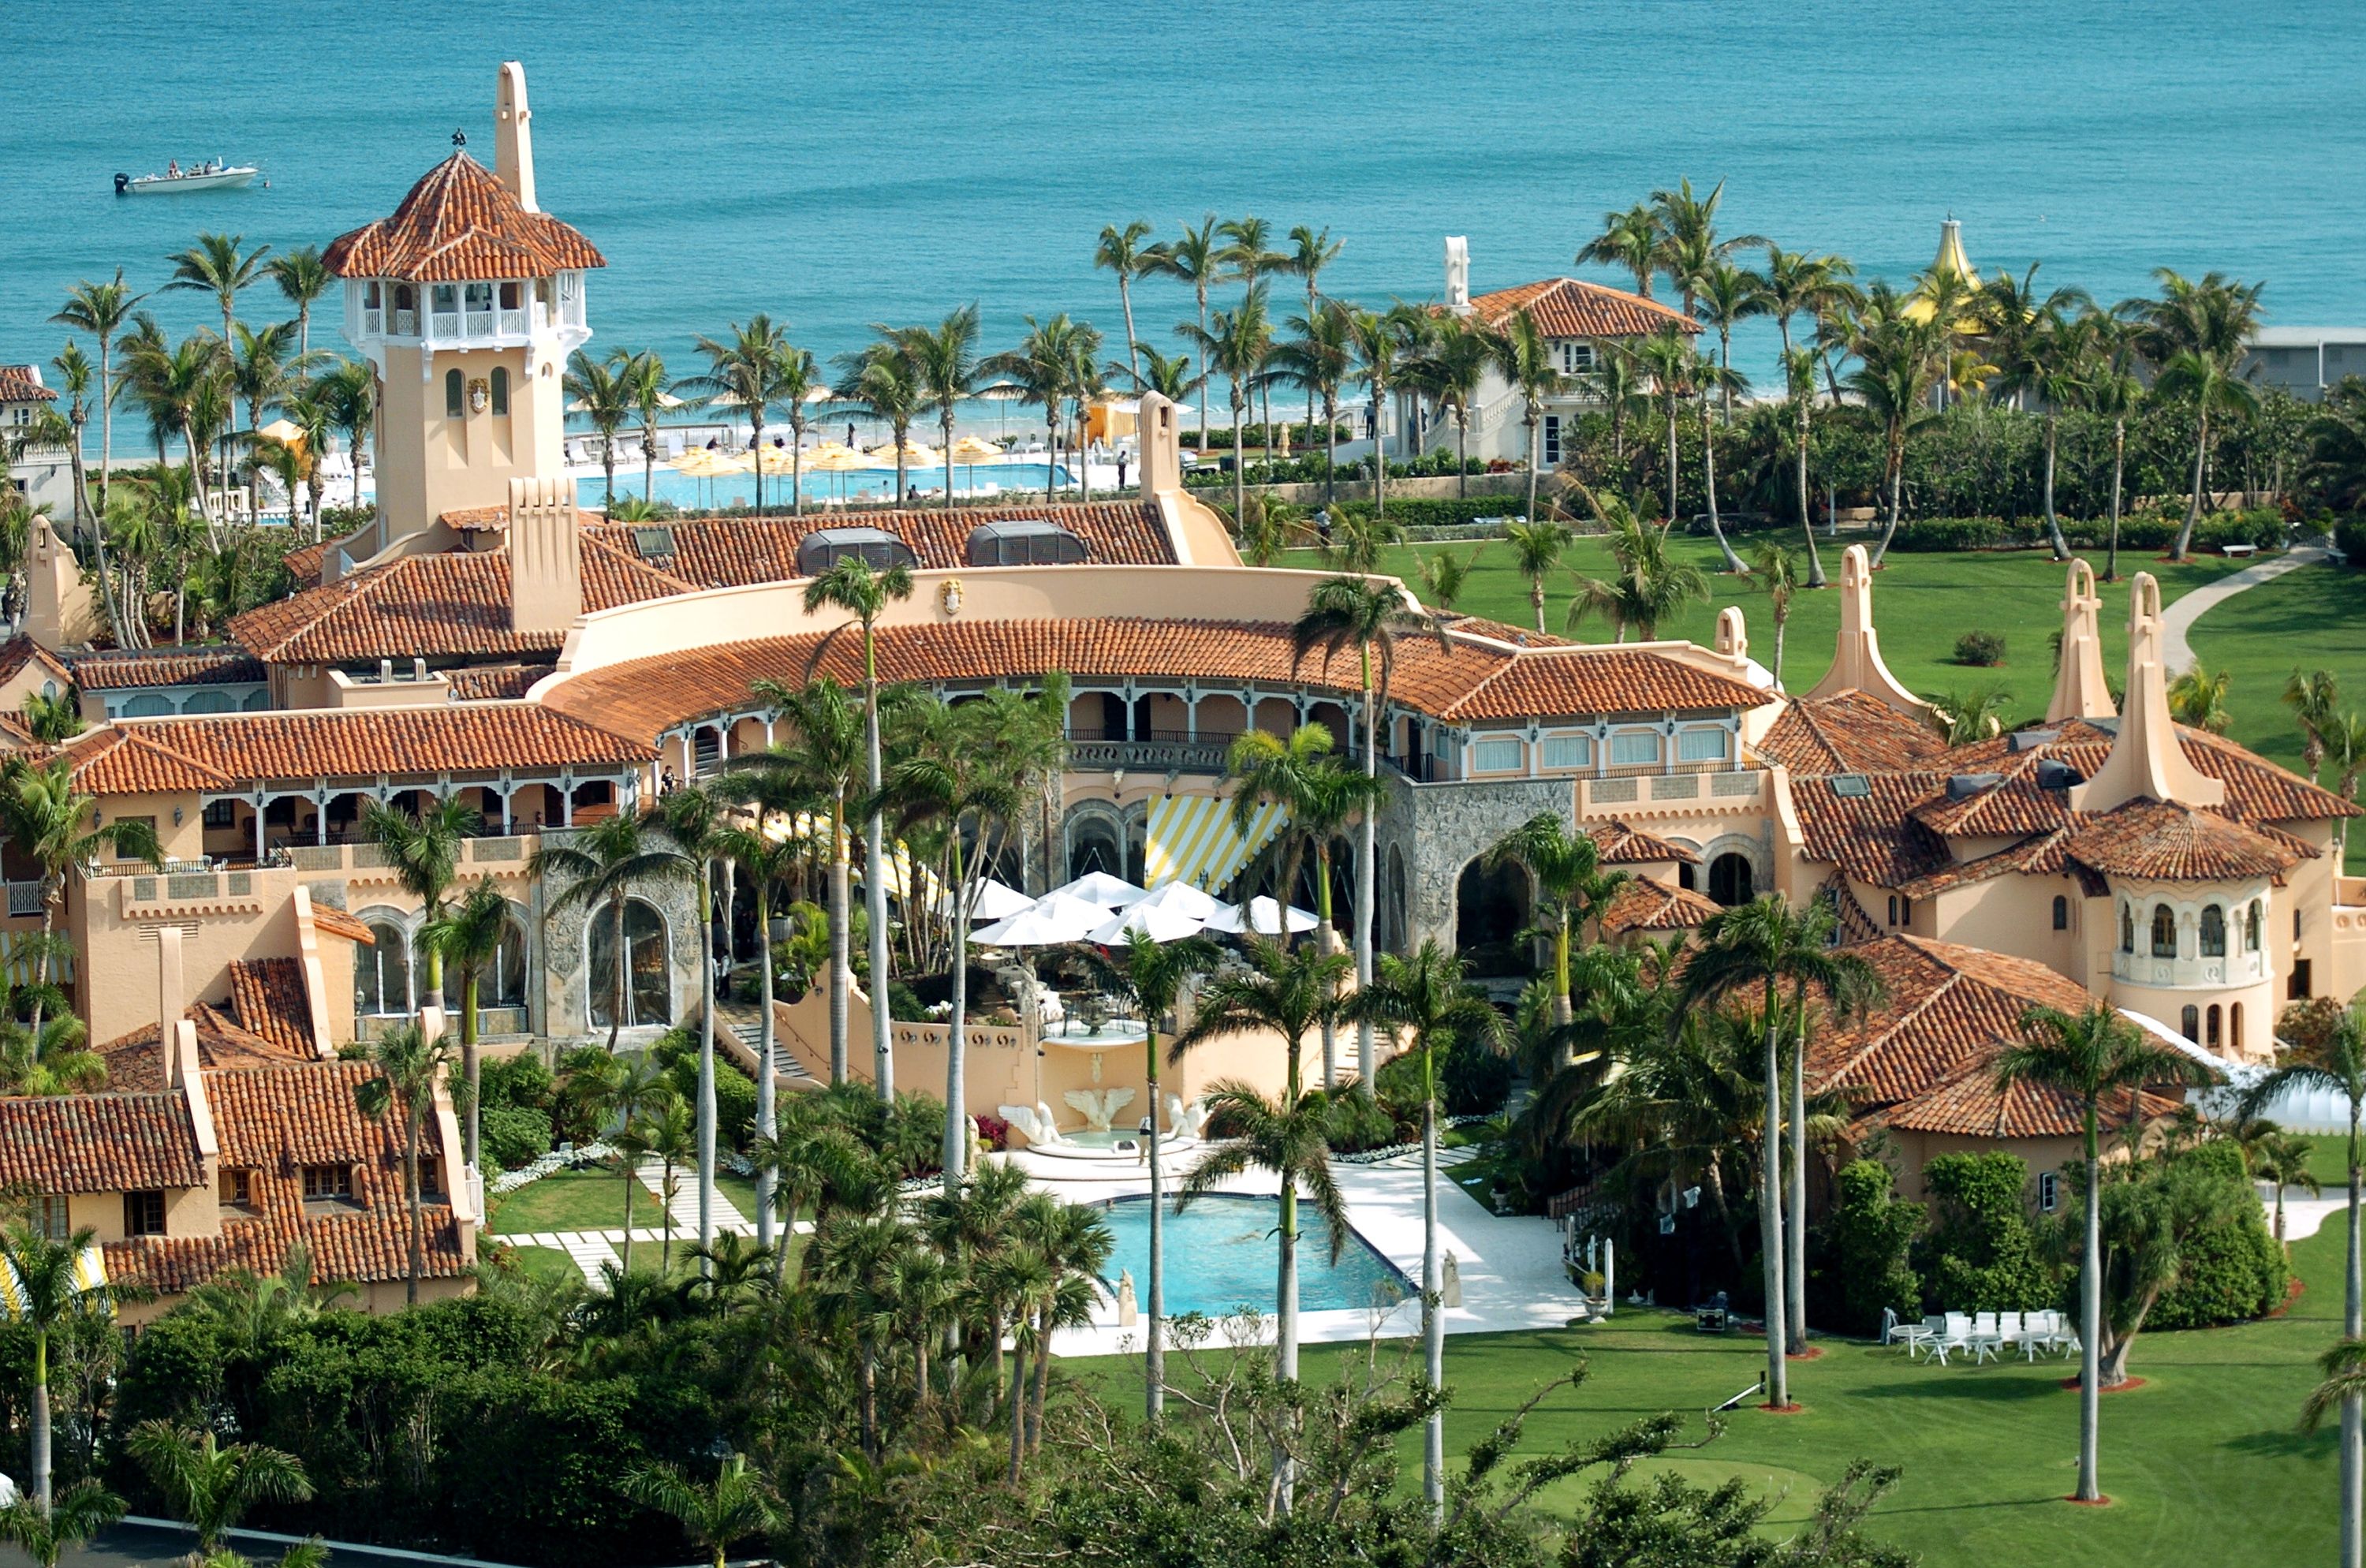 Donald Trump's Mar a Lago Estate Facts and Pictures - Mar-a-Lago History  And Photos